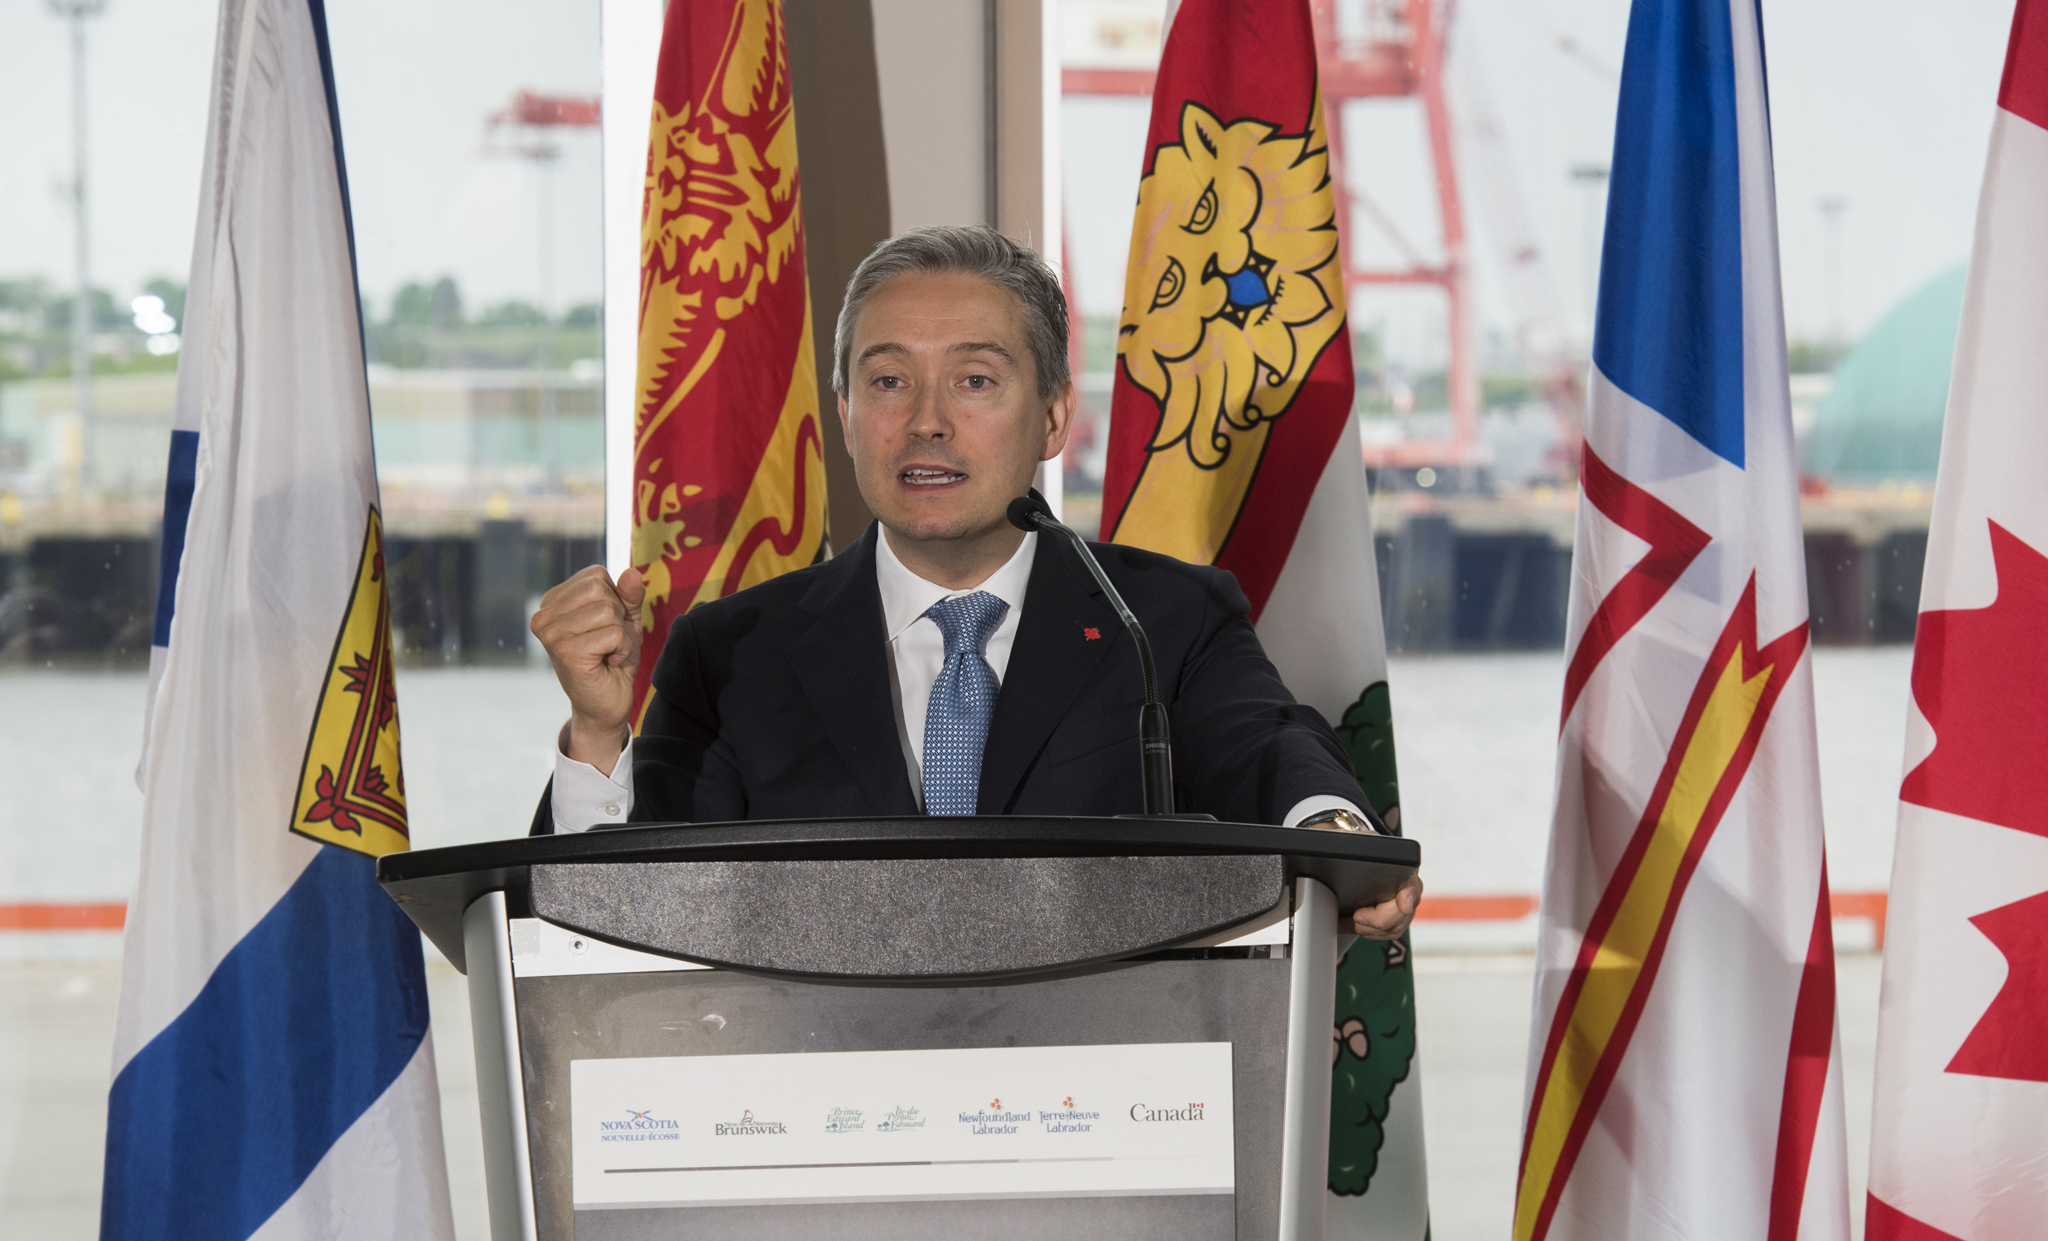 July 4, 2017 - The Honourable François-Philippe Champagne, Minister of International Trade, announces the Atlantic Trade and Investment Growth Strategy.